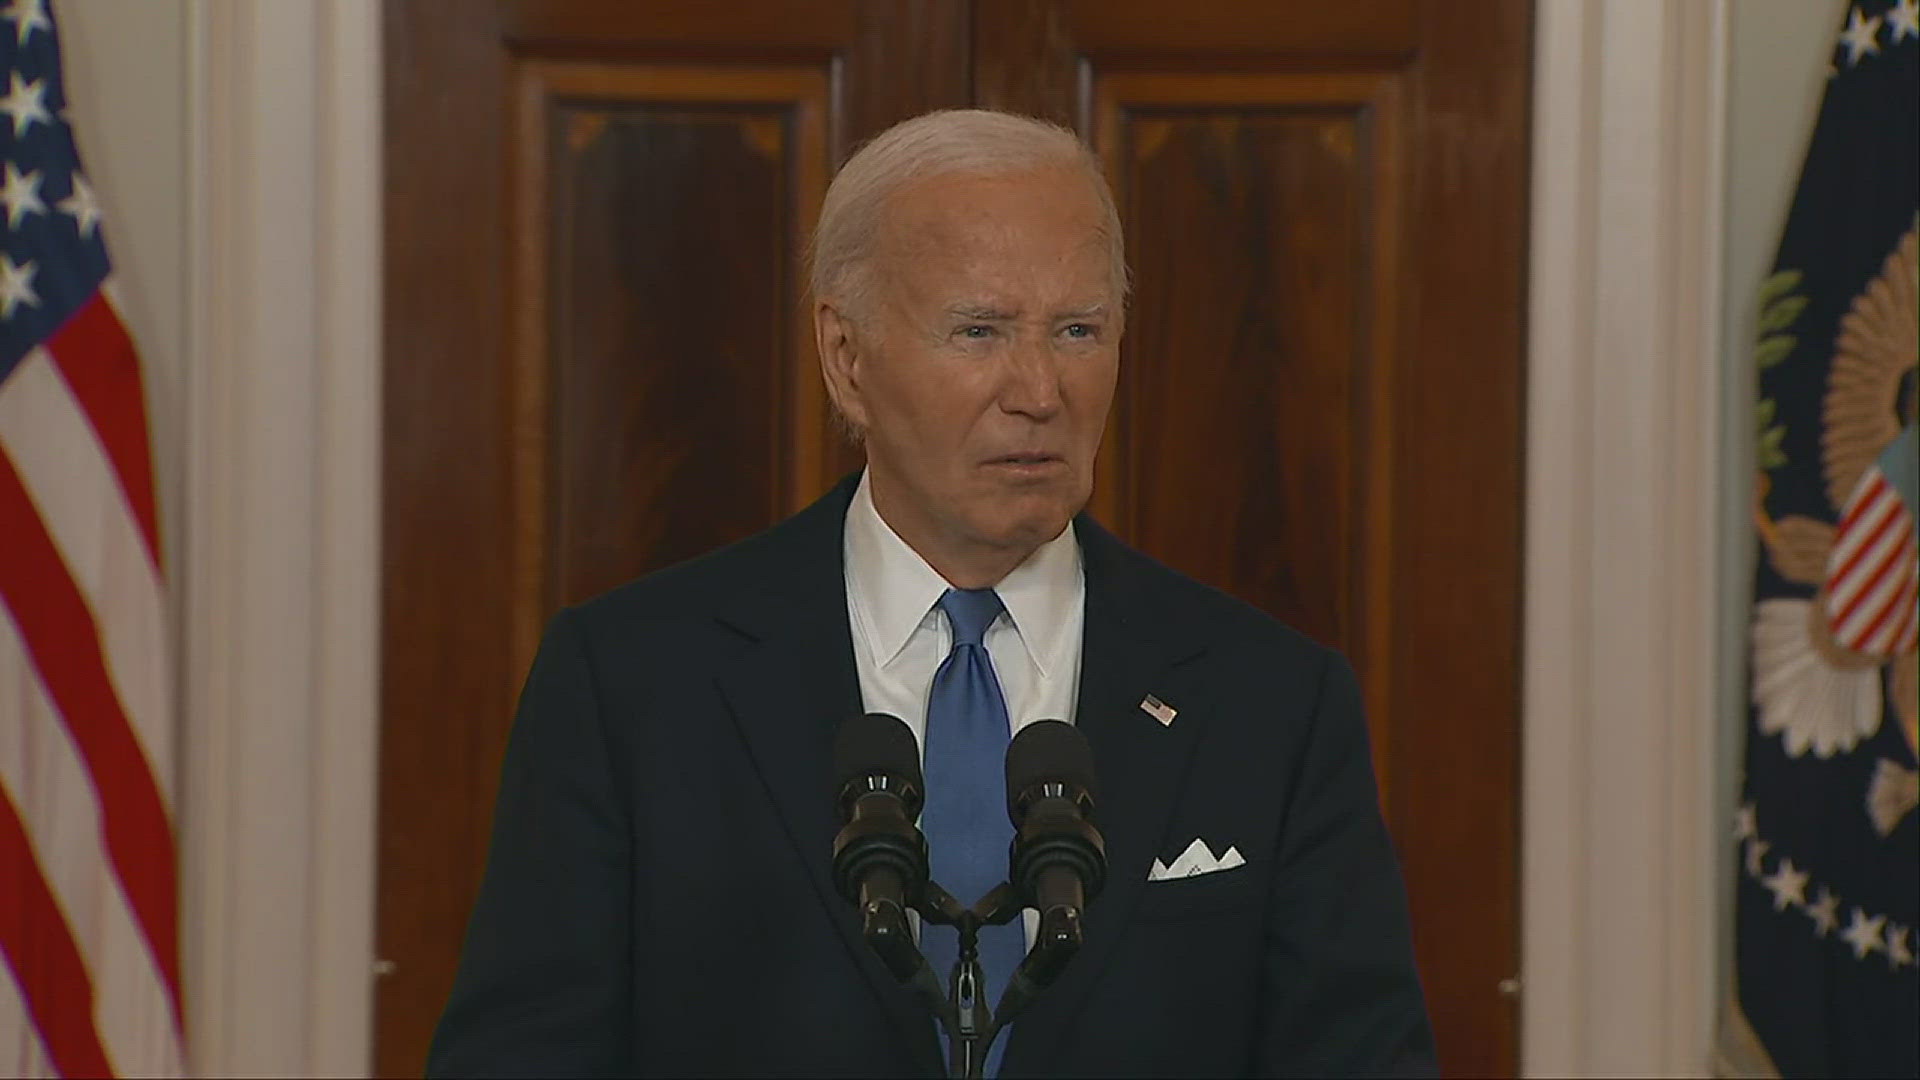 Biden concurs with Justice Sotomayor's dissent, and ends his speech with "May God help preserve our democracy." (Video provided by Fox)